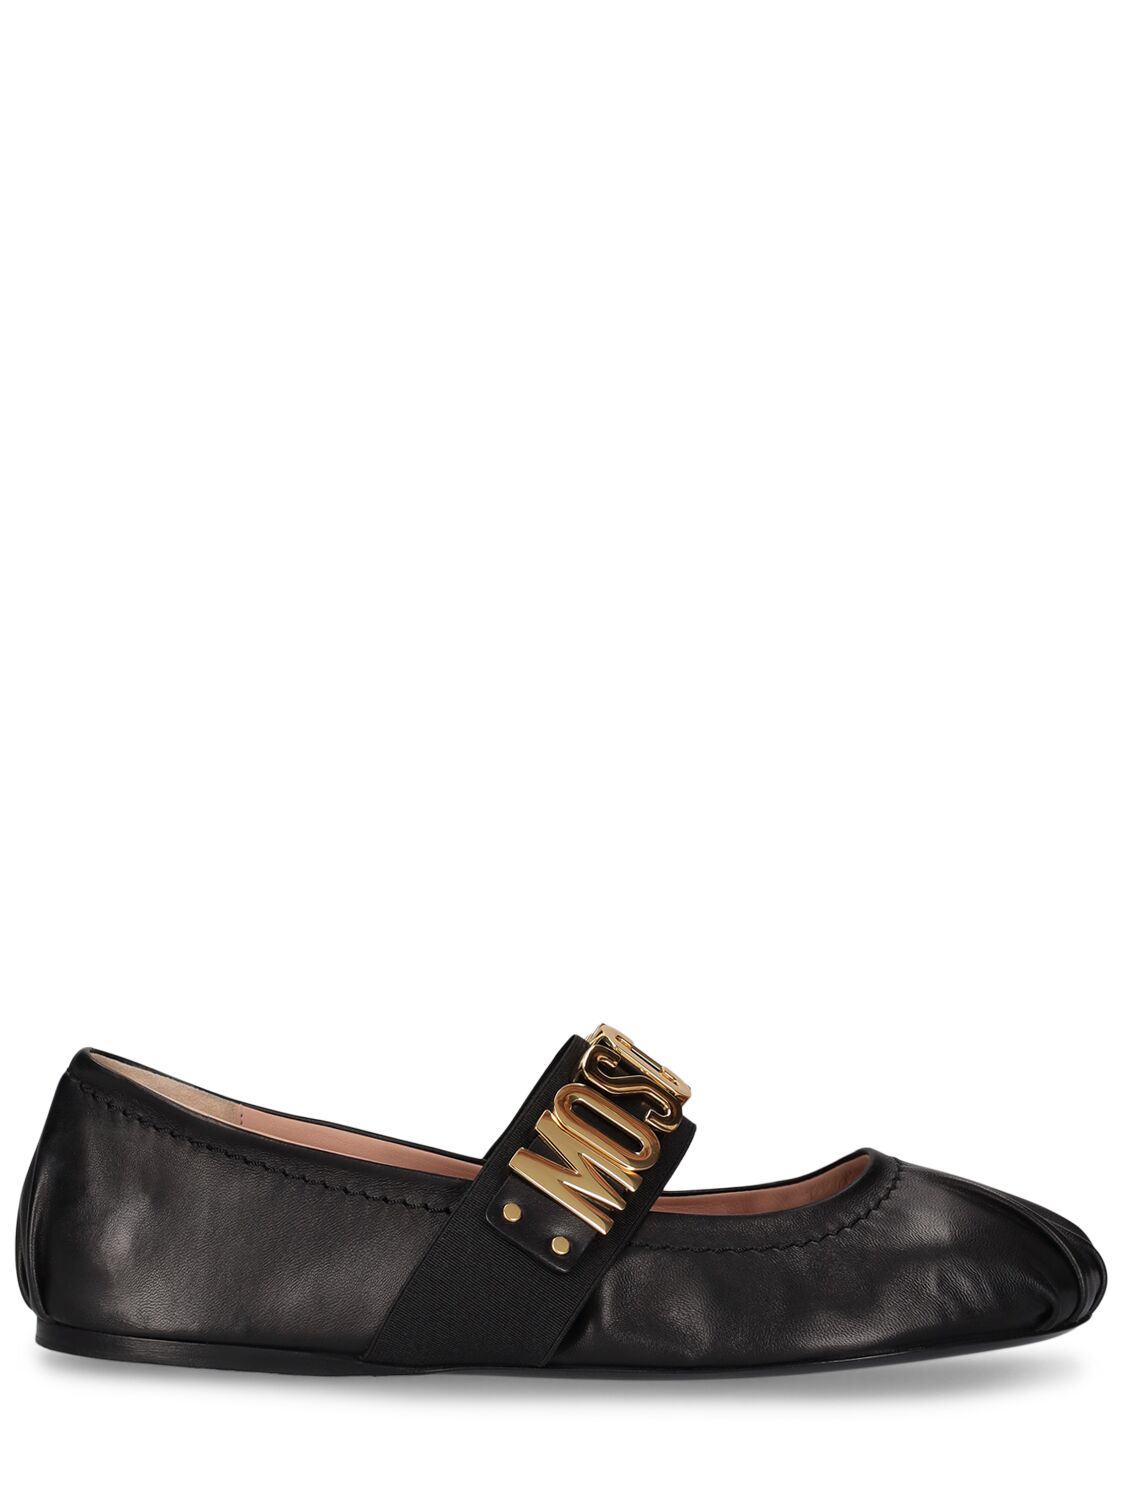 Moschino 10mm Leather Ballerina Flats In Black